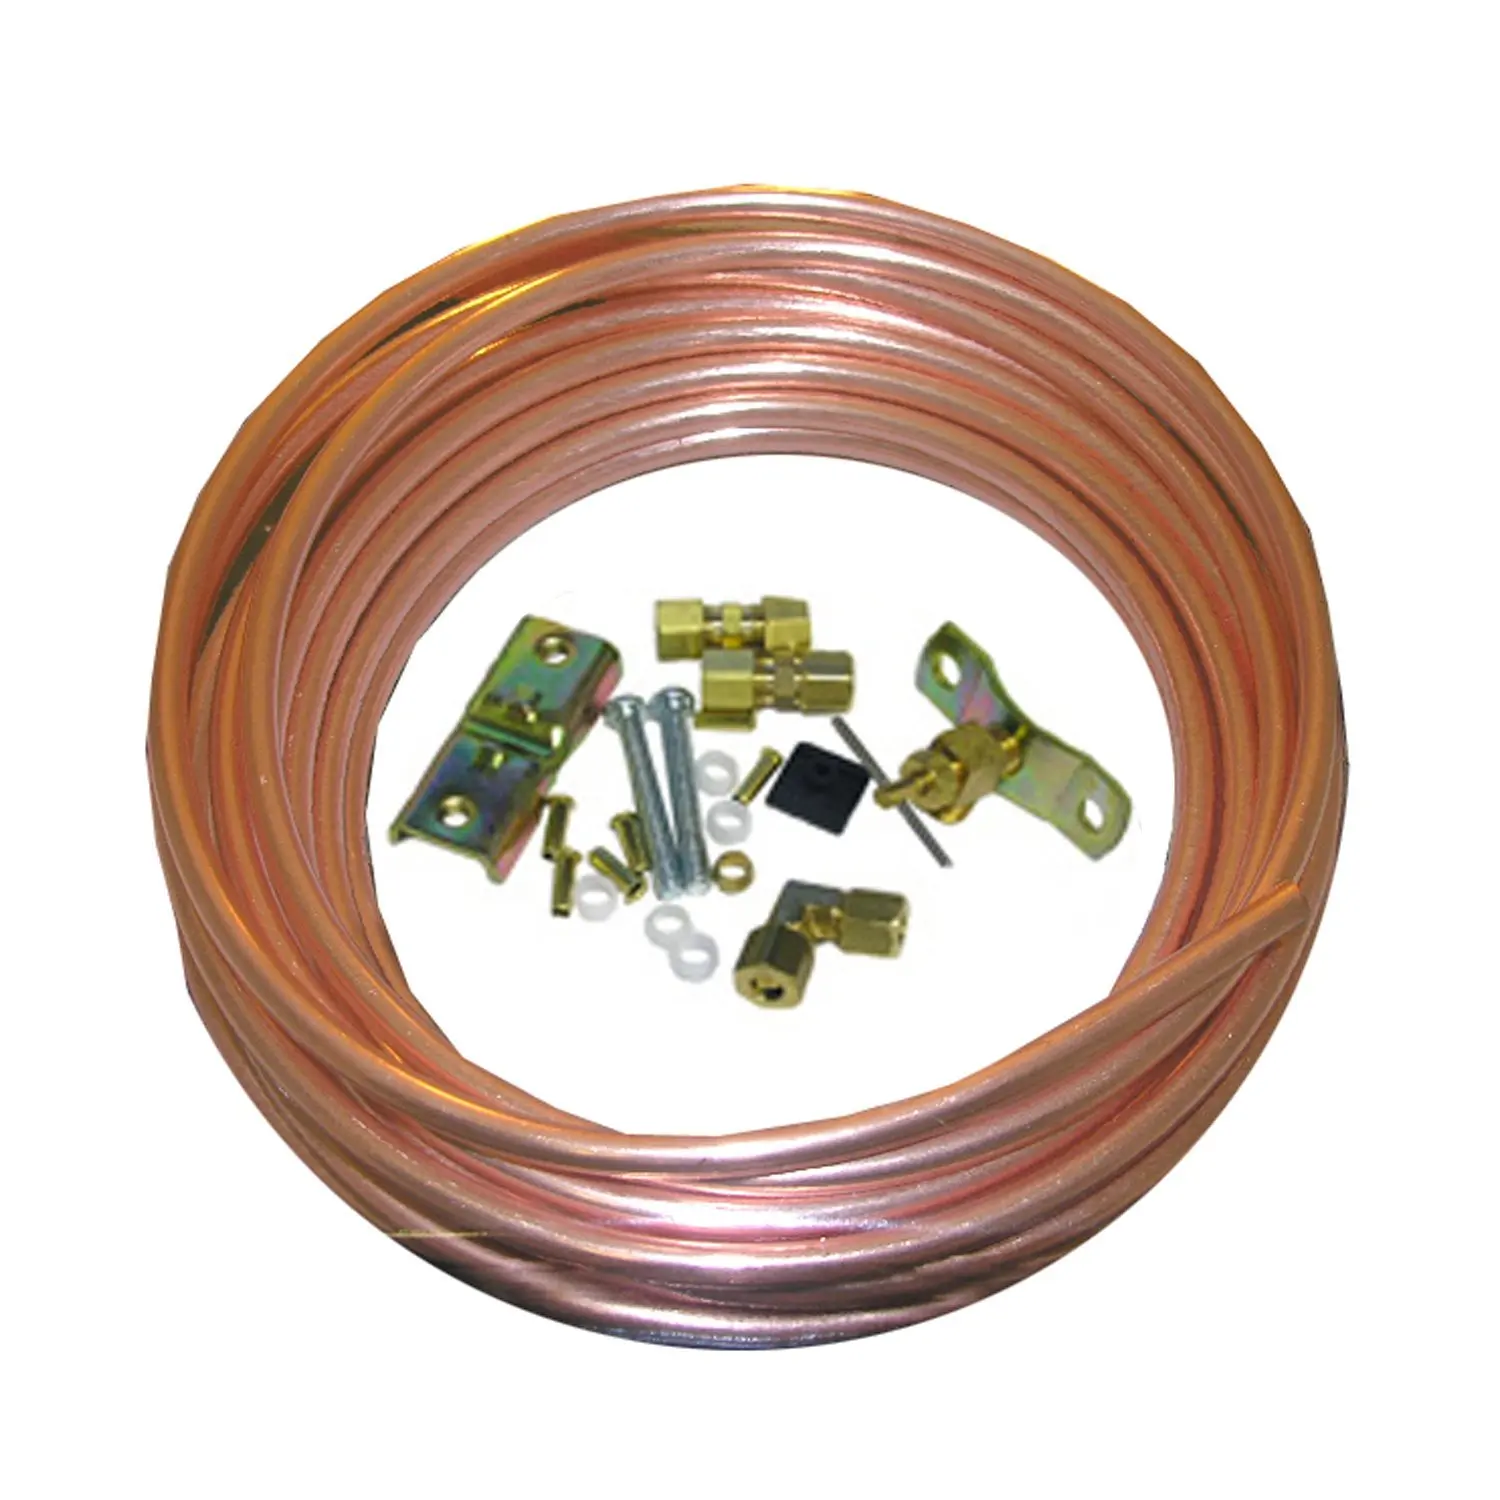 Uniweld 70045 Swage Punch for 5//8-Inch OD Copper Tubing